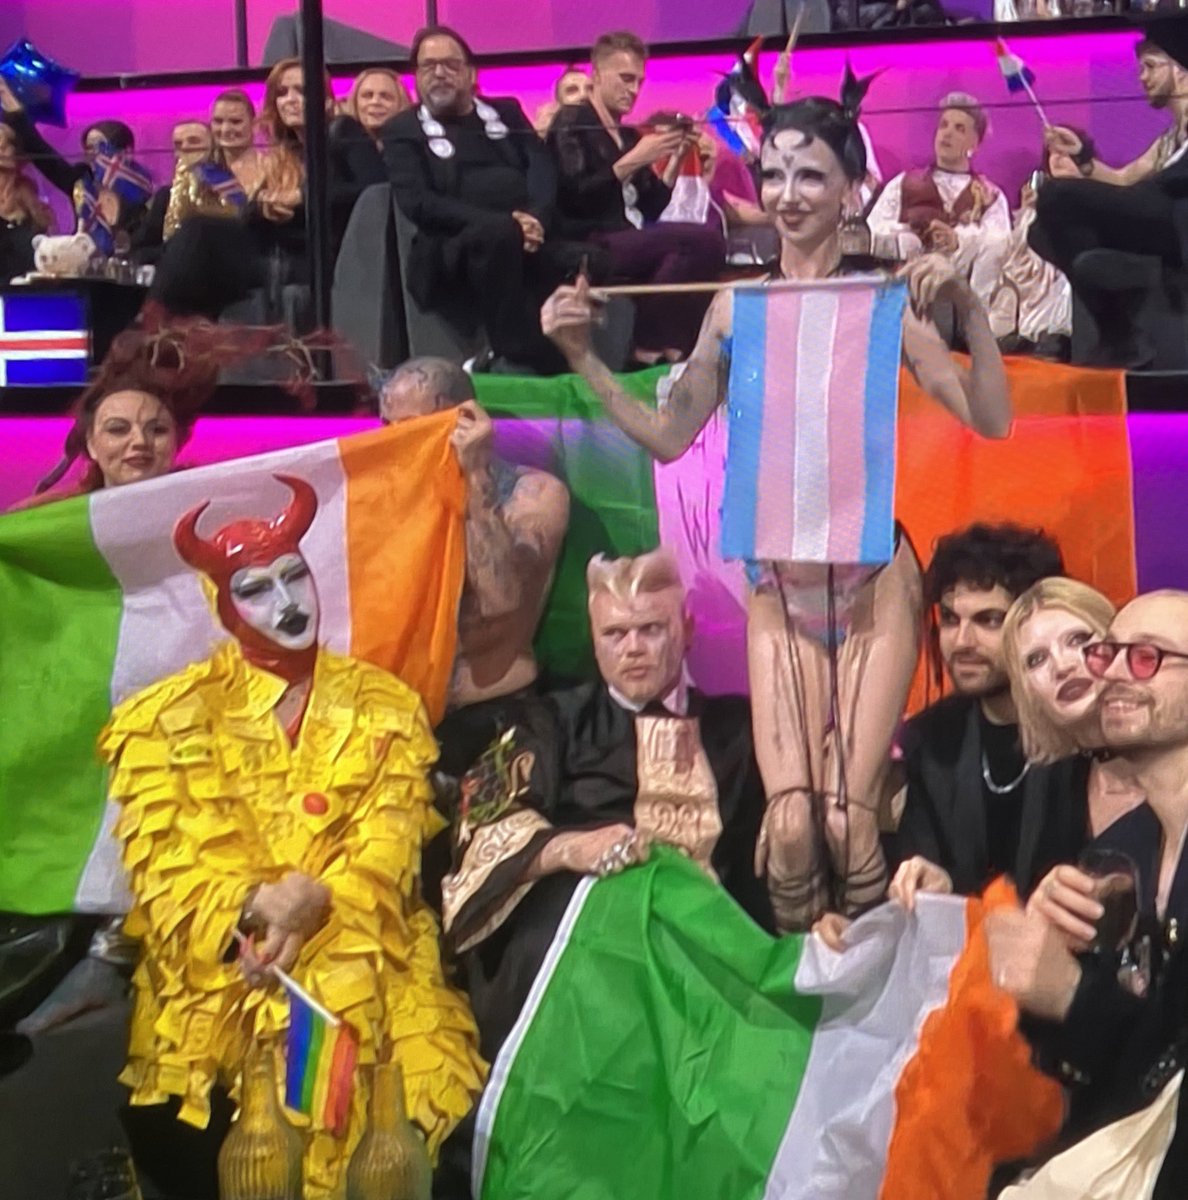 Isn’t it strange how @Eurovision claims to stand against political symbolism, but allows this from the Ireland entry - a flag representing an ideology that has irreversibly harmed children, infringed upon women’s rights and undermined freedom of speech. An utter disgrace.